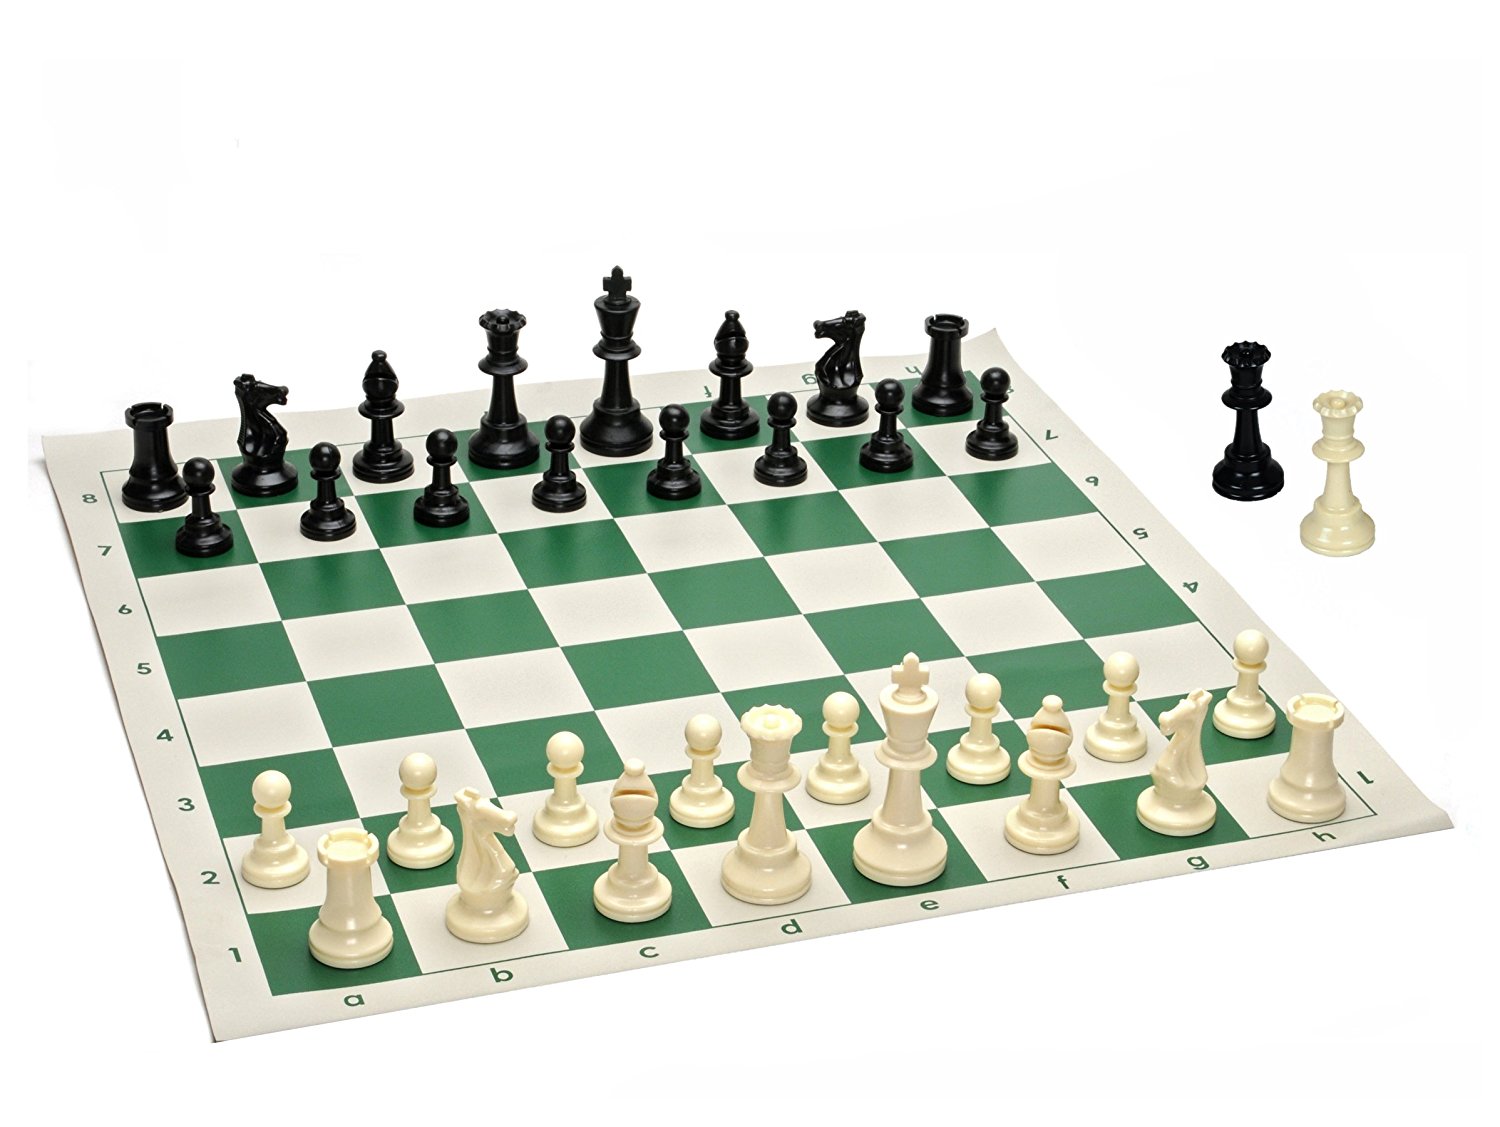 16-inch-Tournament-Chess-Set-Game-Plastic-Pieces-Green-Roll-Outdoor-Travel-Camping-Game-1356870